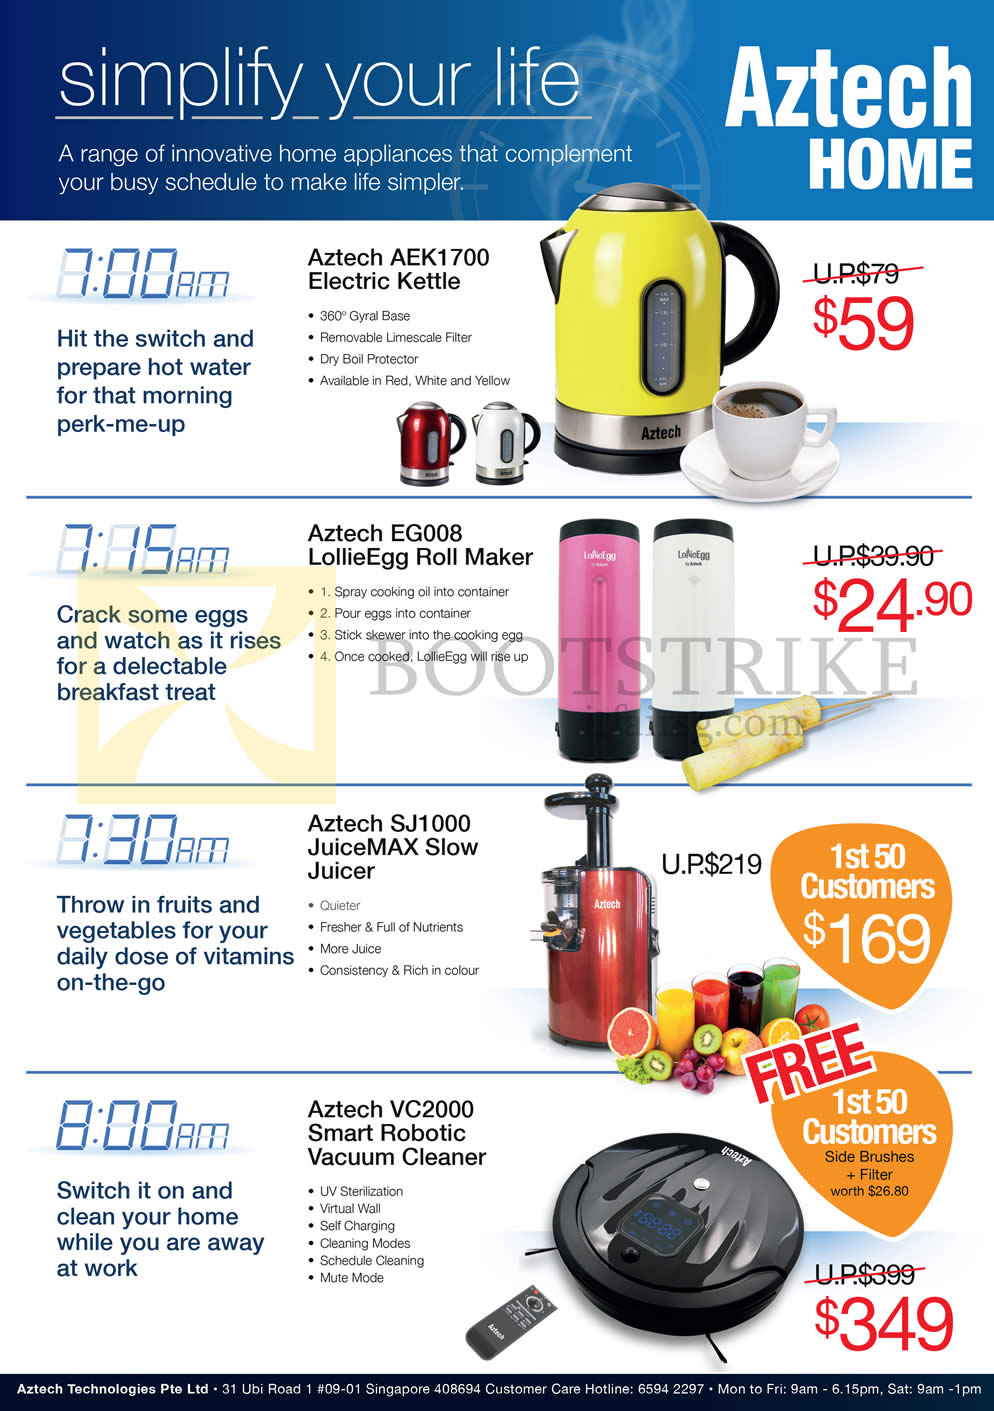 COMEX 2014 price list image brochure of Aztech Electric Kettle AEK1700, EG008 LollieEgg Roll Maker, SJ1000 JuiceMax Slow Juicer, VC2000 Robot Vacuum Cleaner